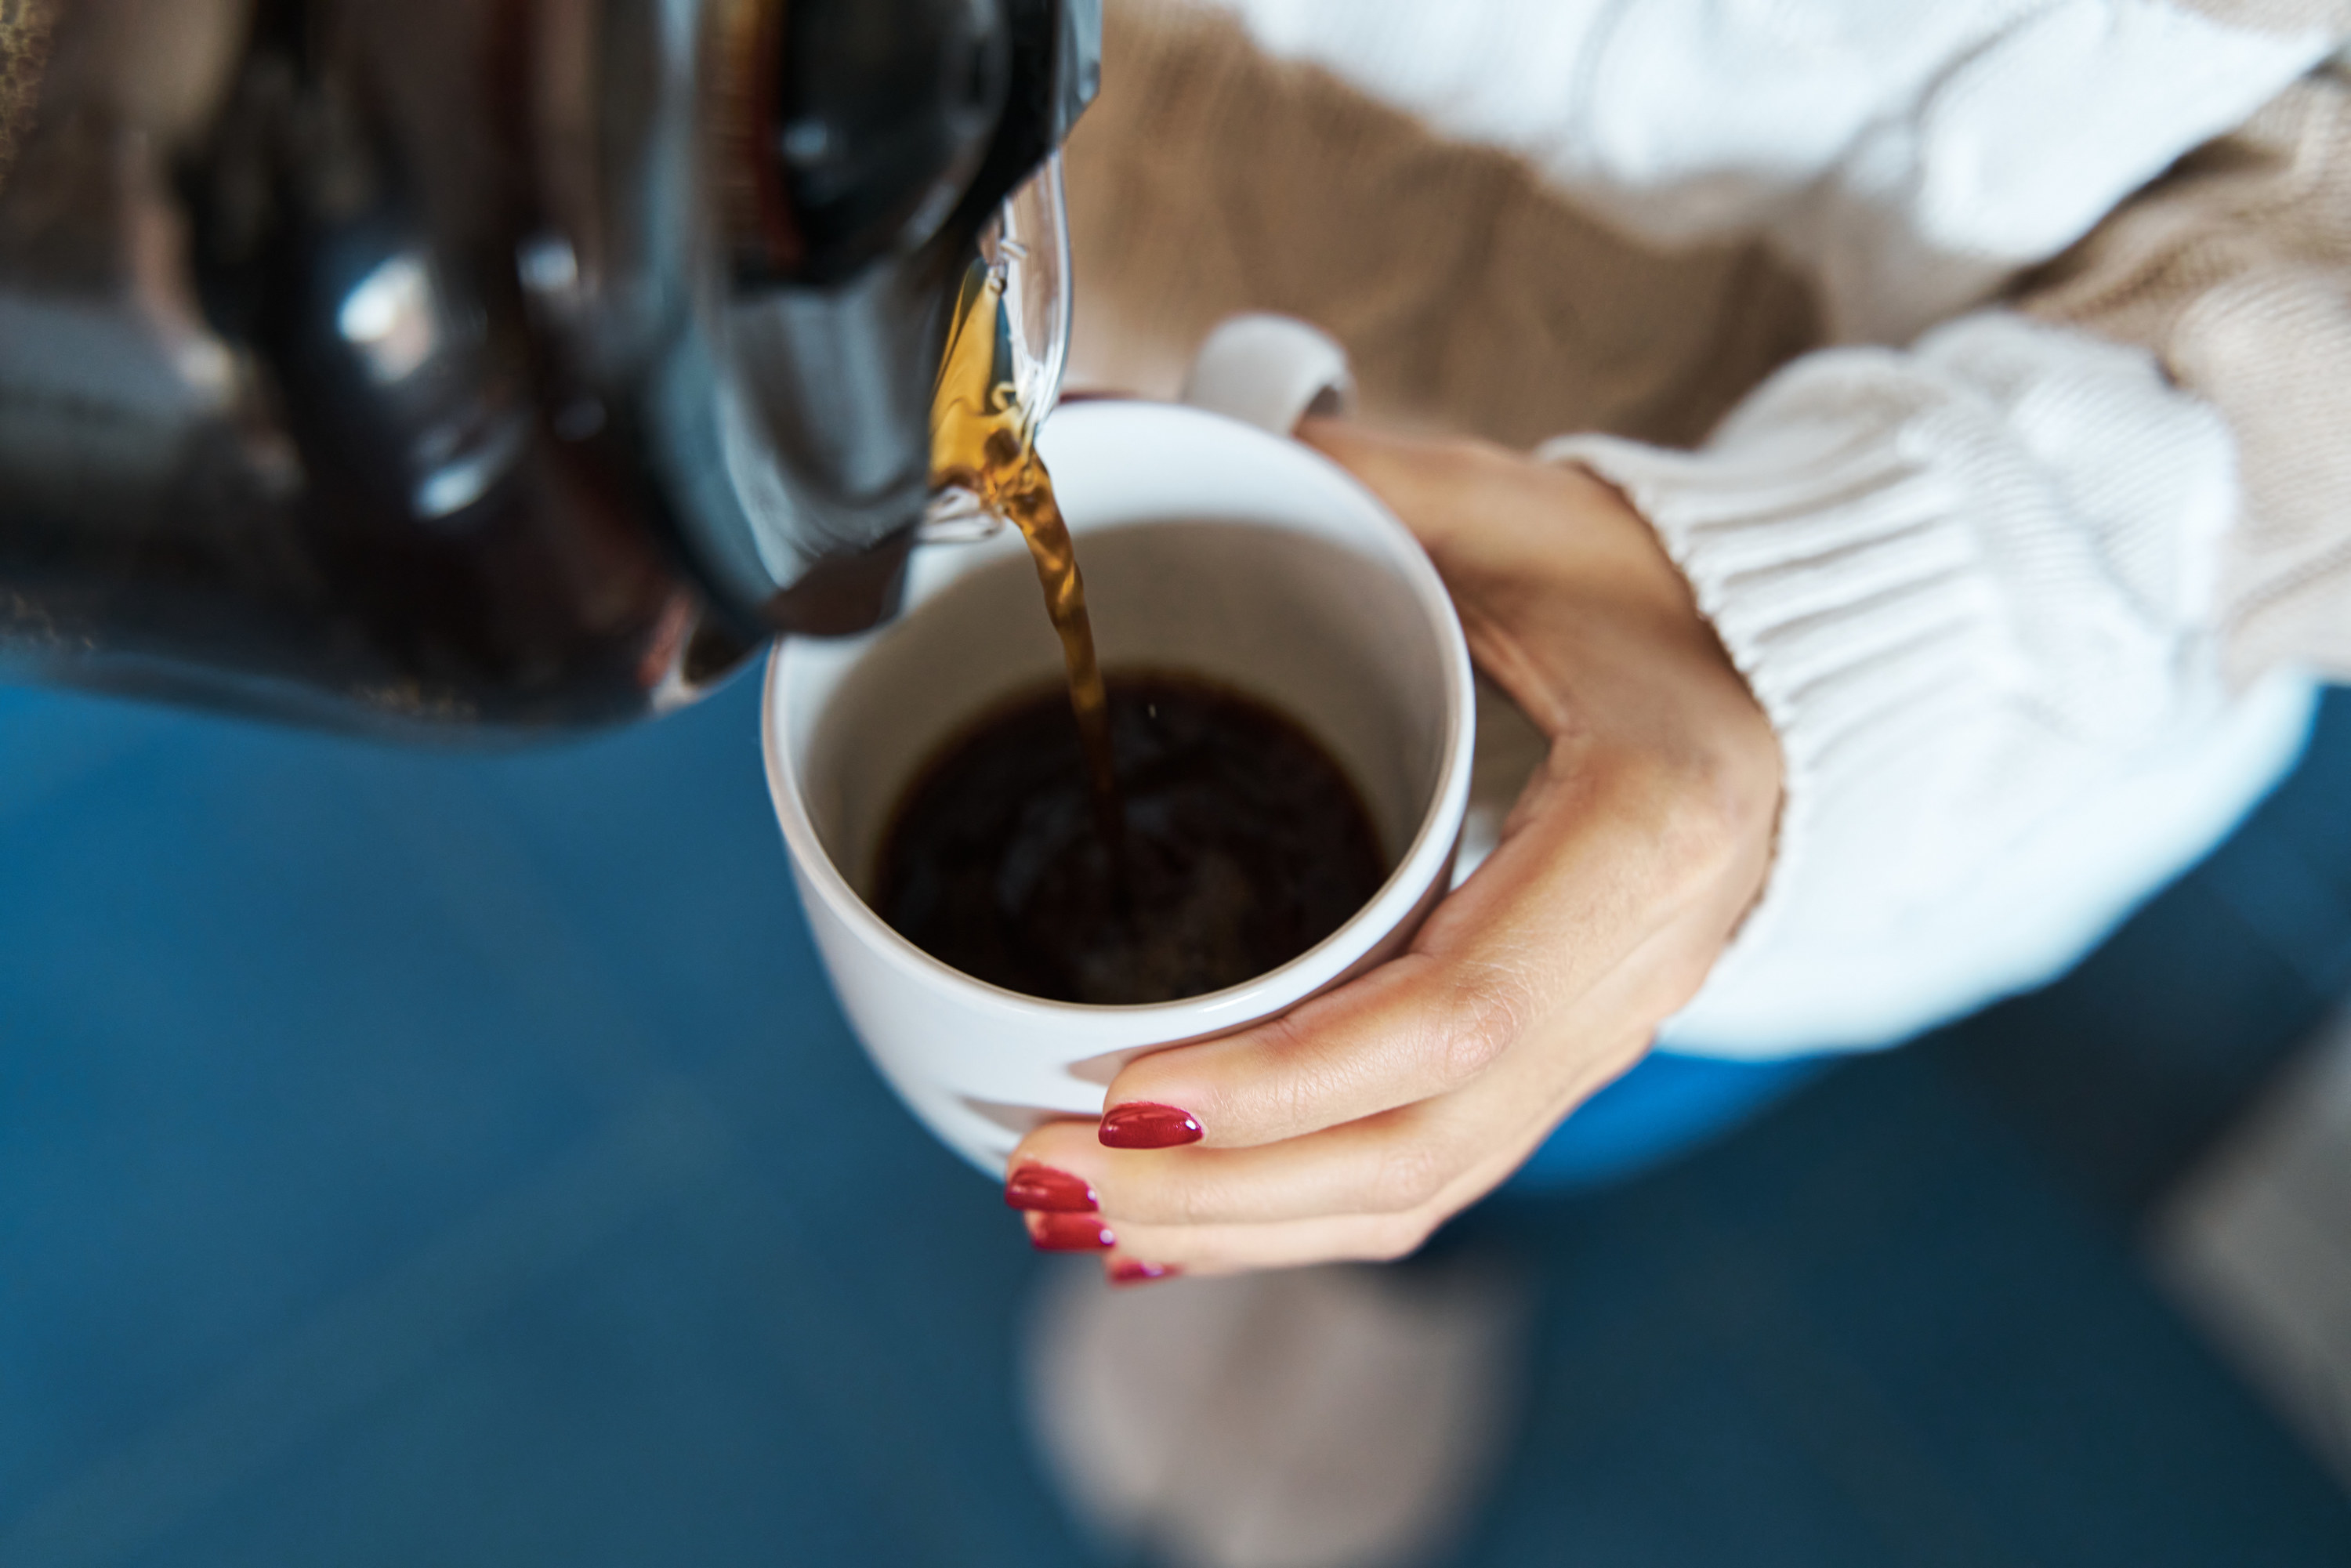 A woman pours a cup of coffee.